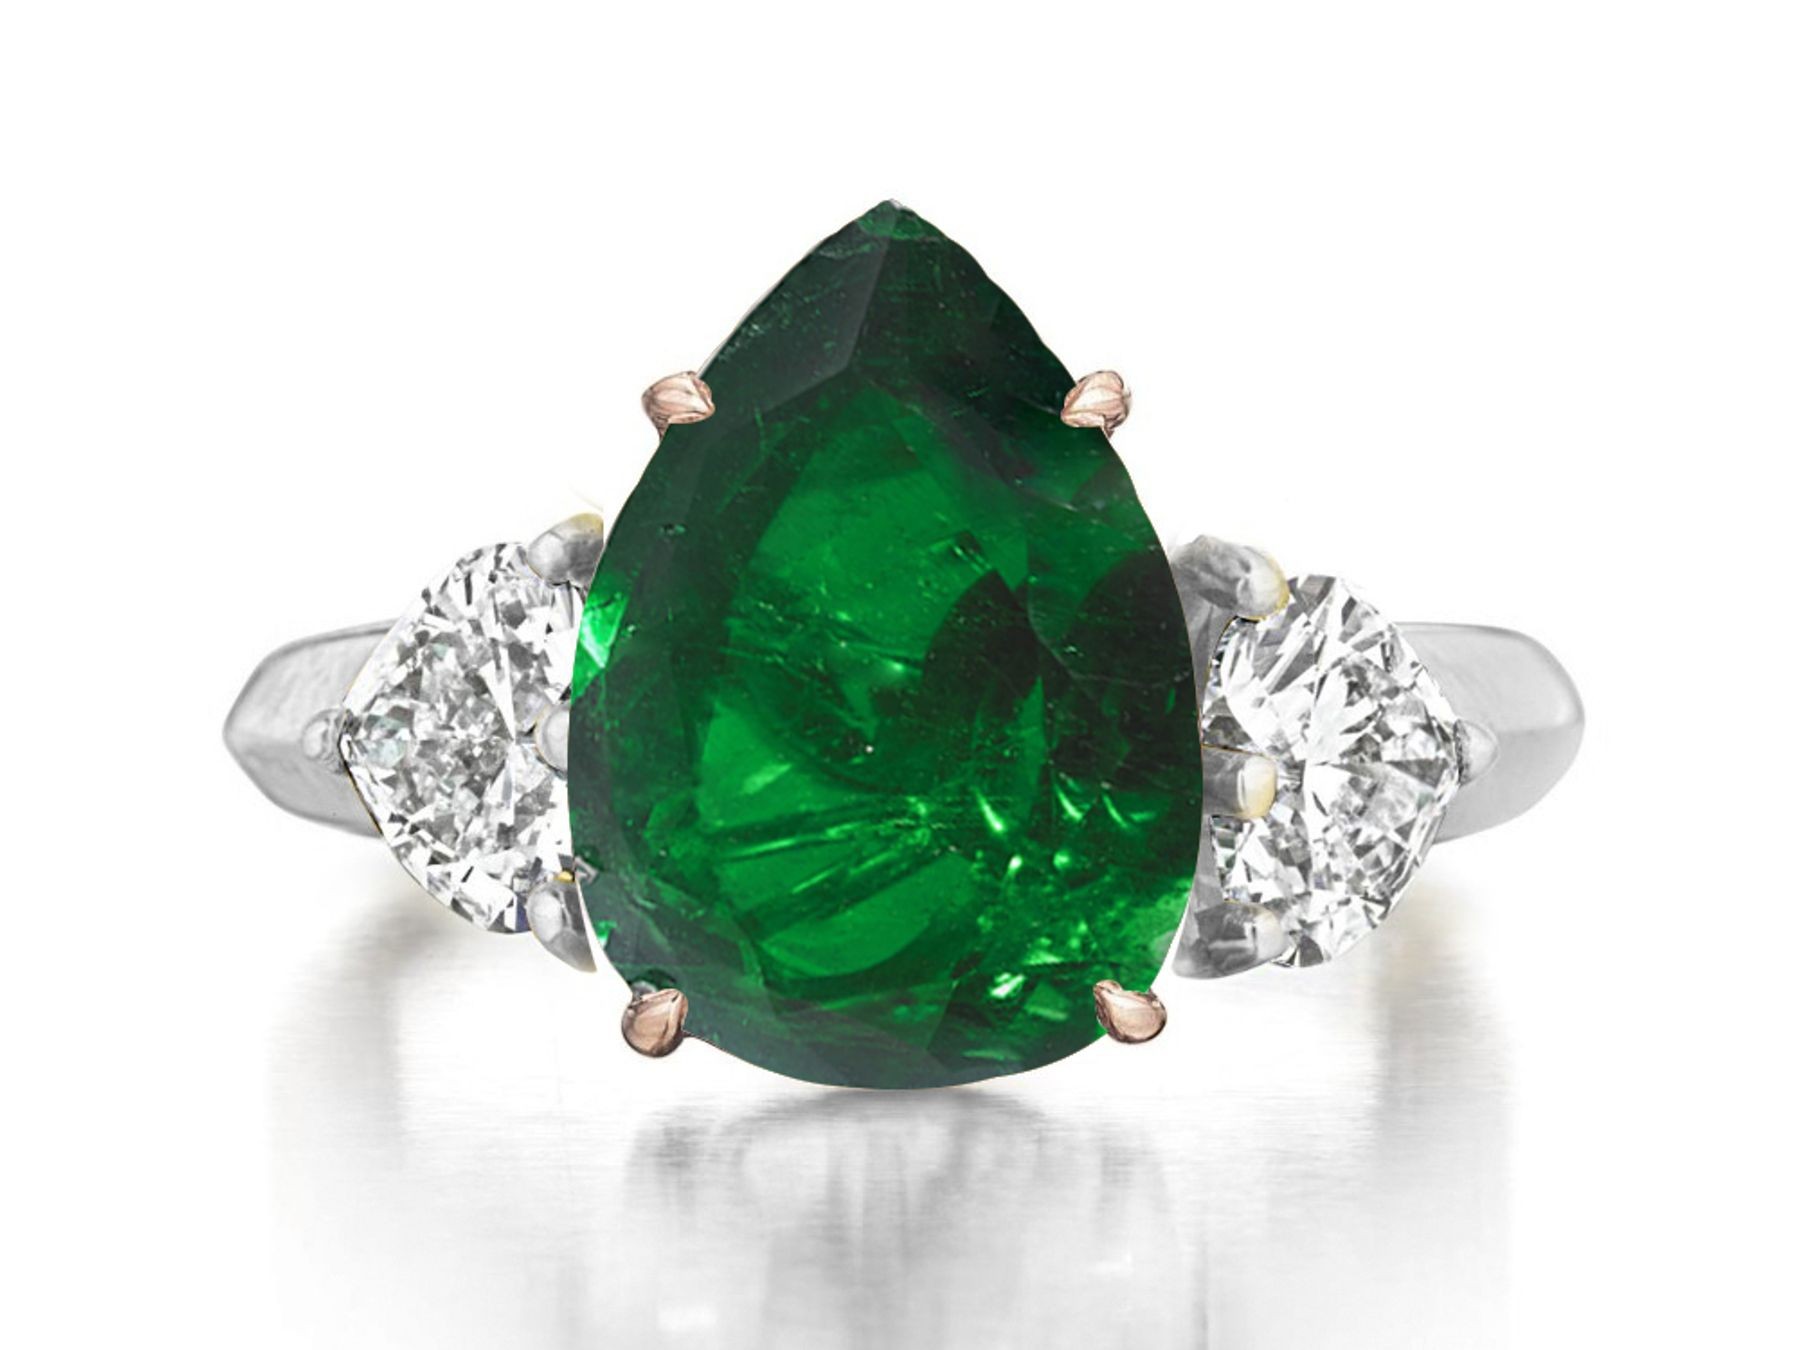 Made to Order Three Stone Rings Heart Shaped Diamonds & Pears Shaped Emerald Rings